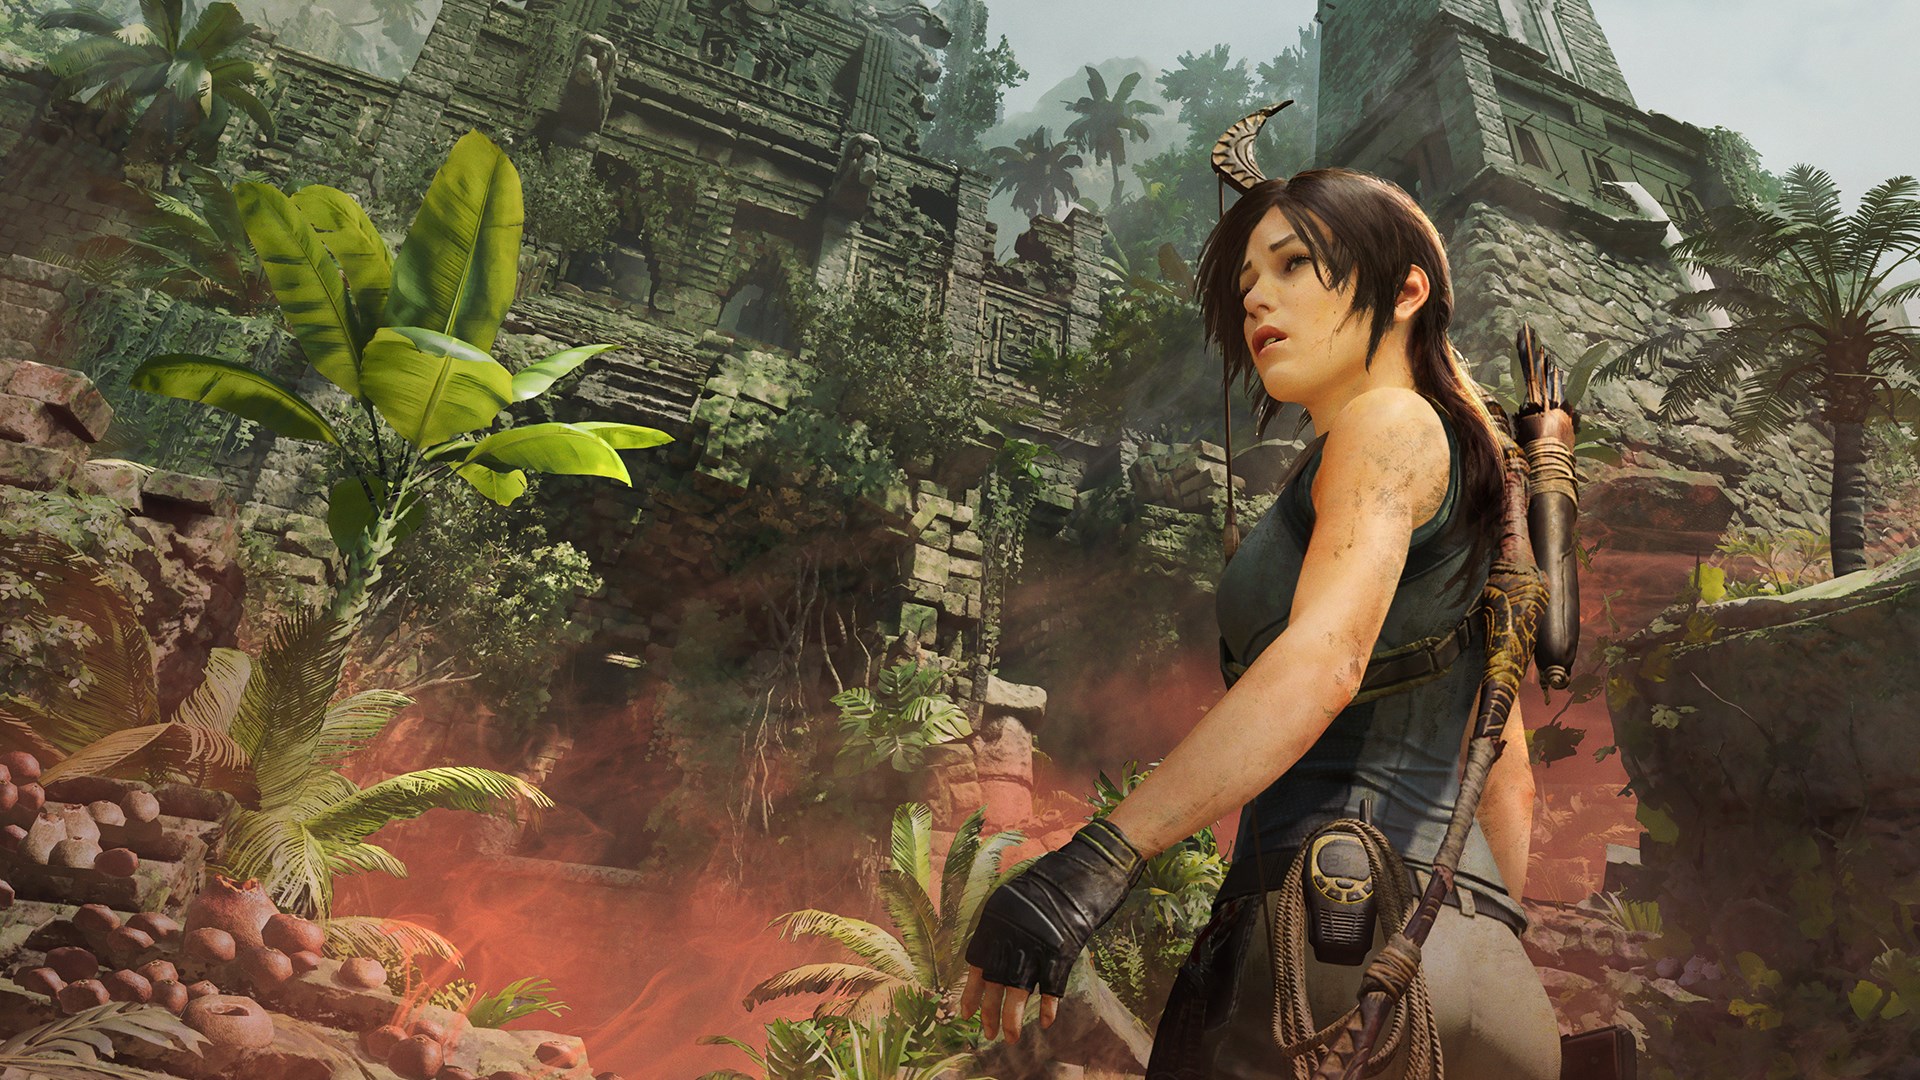 Lara Croft is about to enter a jungle temple in a screenshot from Shadow of the Tomb Raider